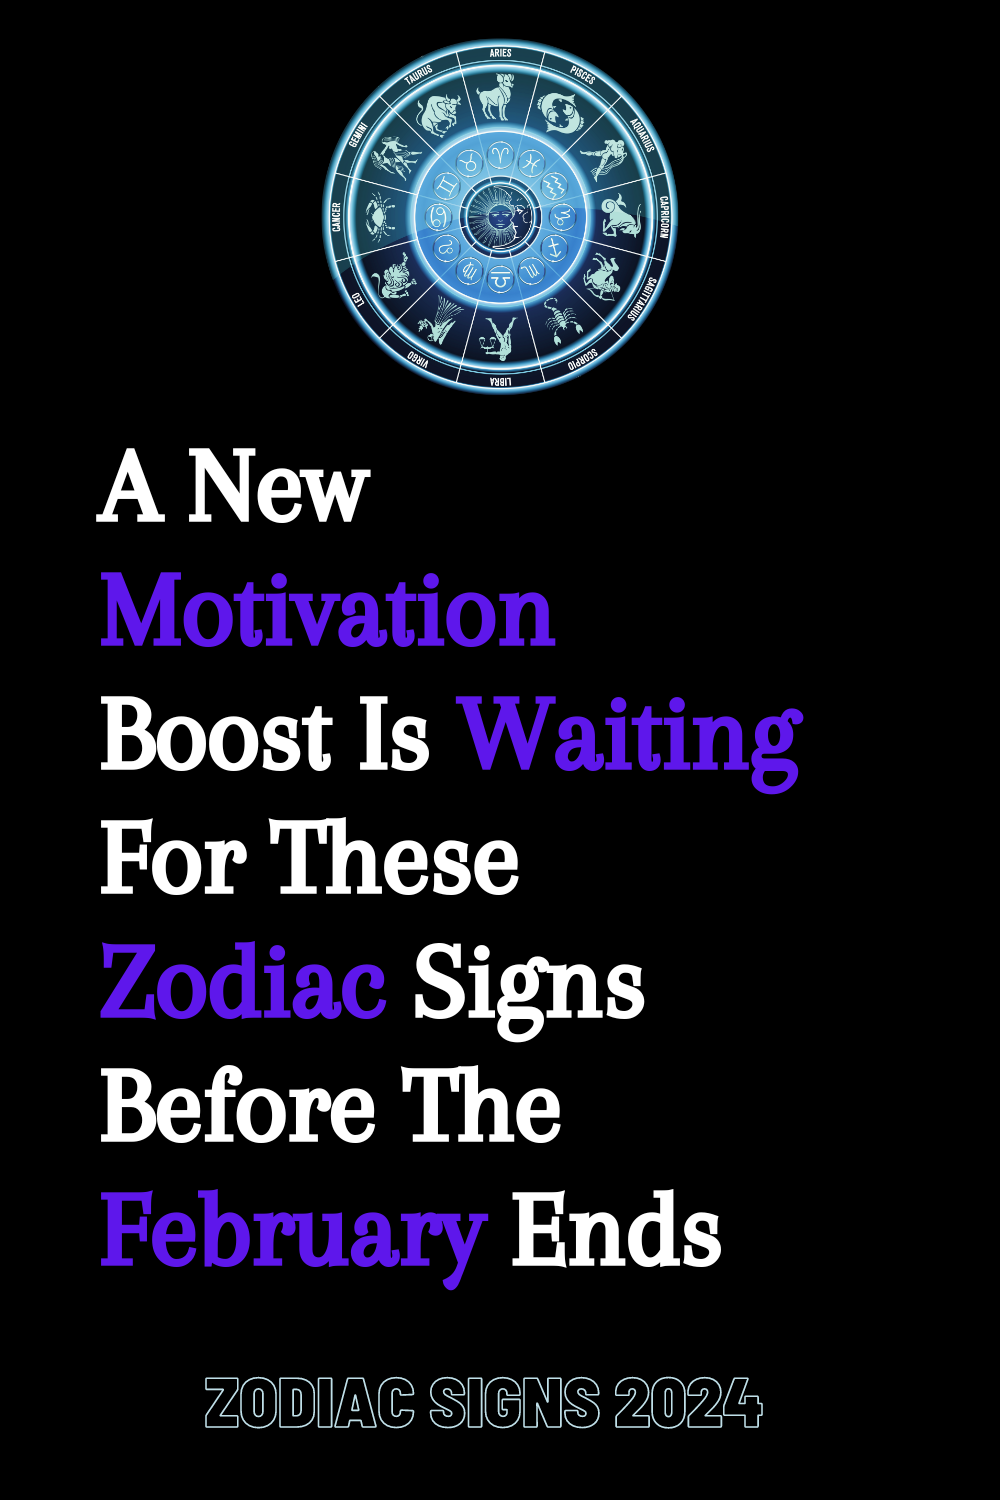 A New Motivation Boost Is Waiting For These Zodiac Signs Before The February Ends